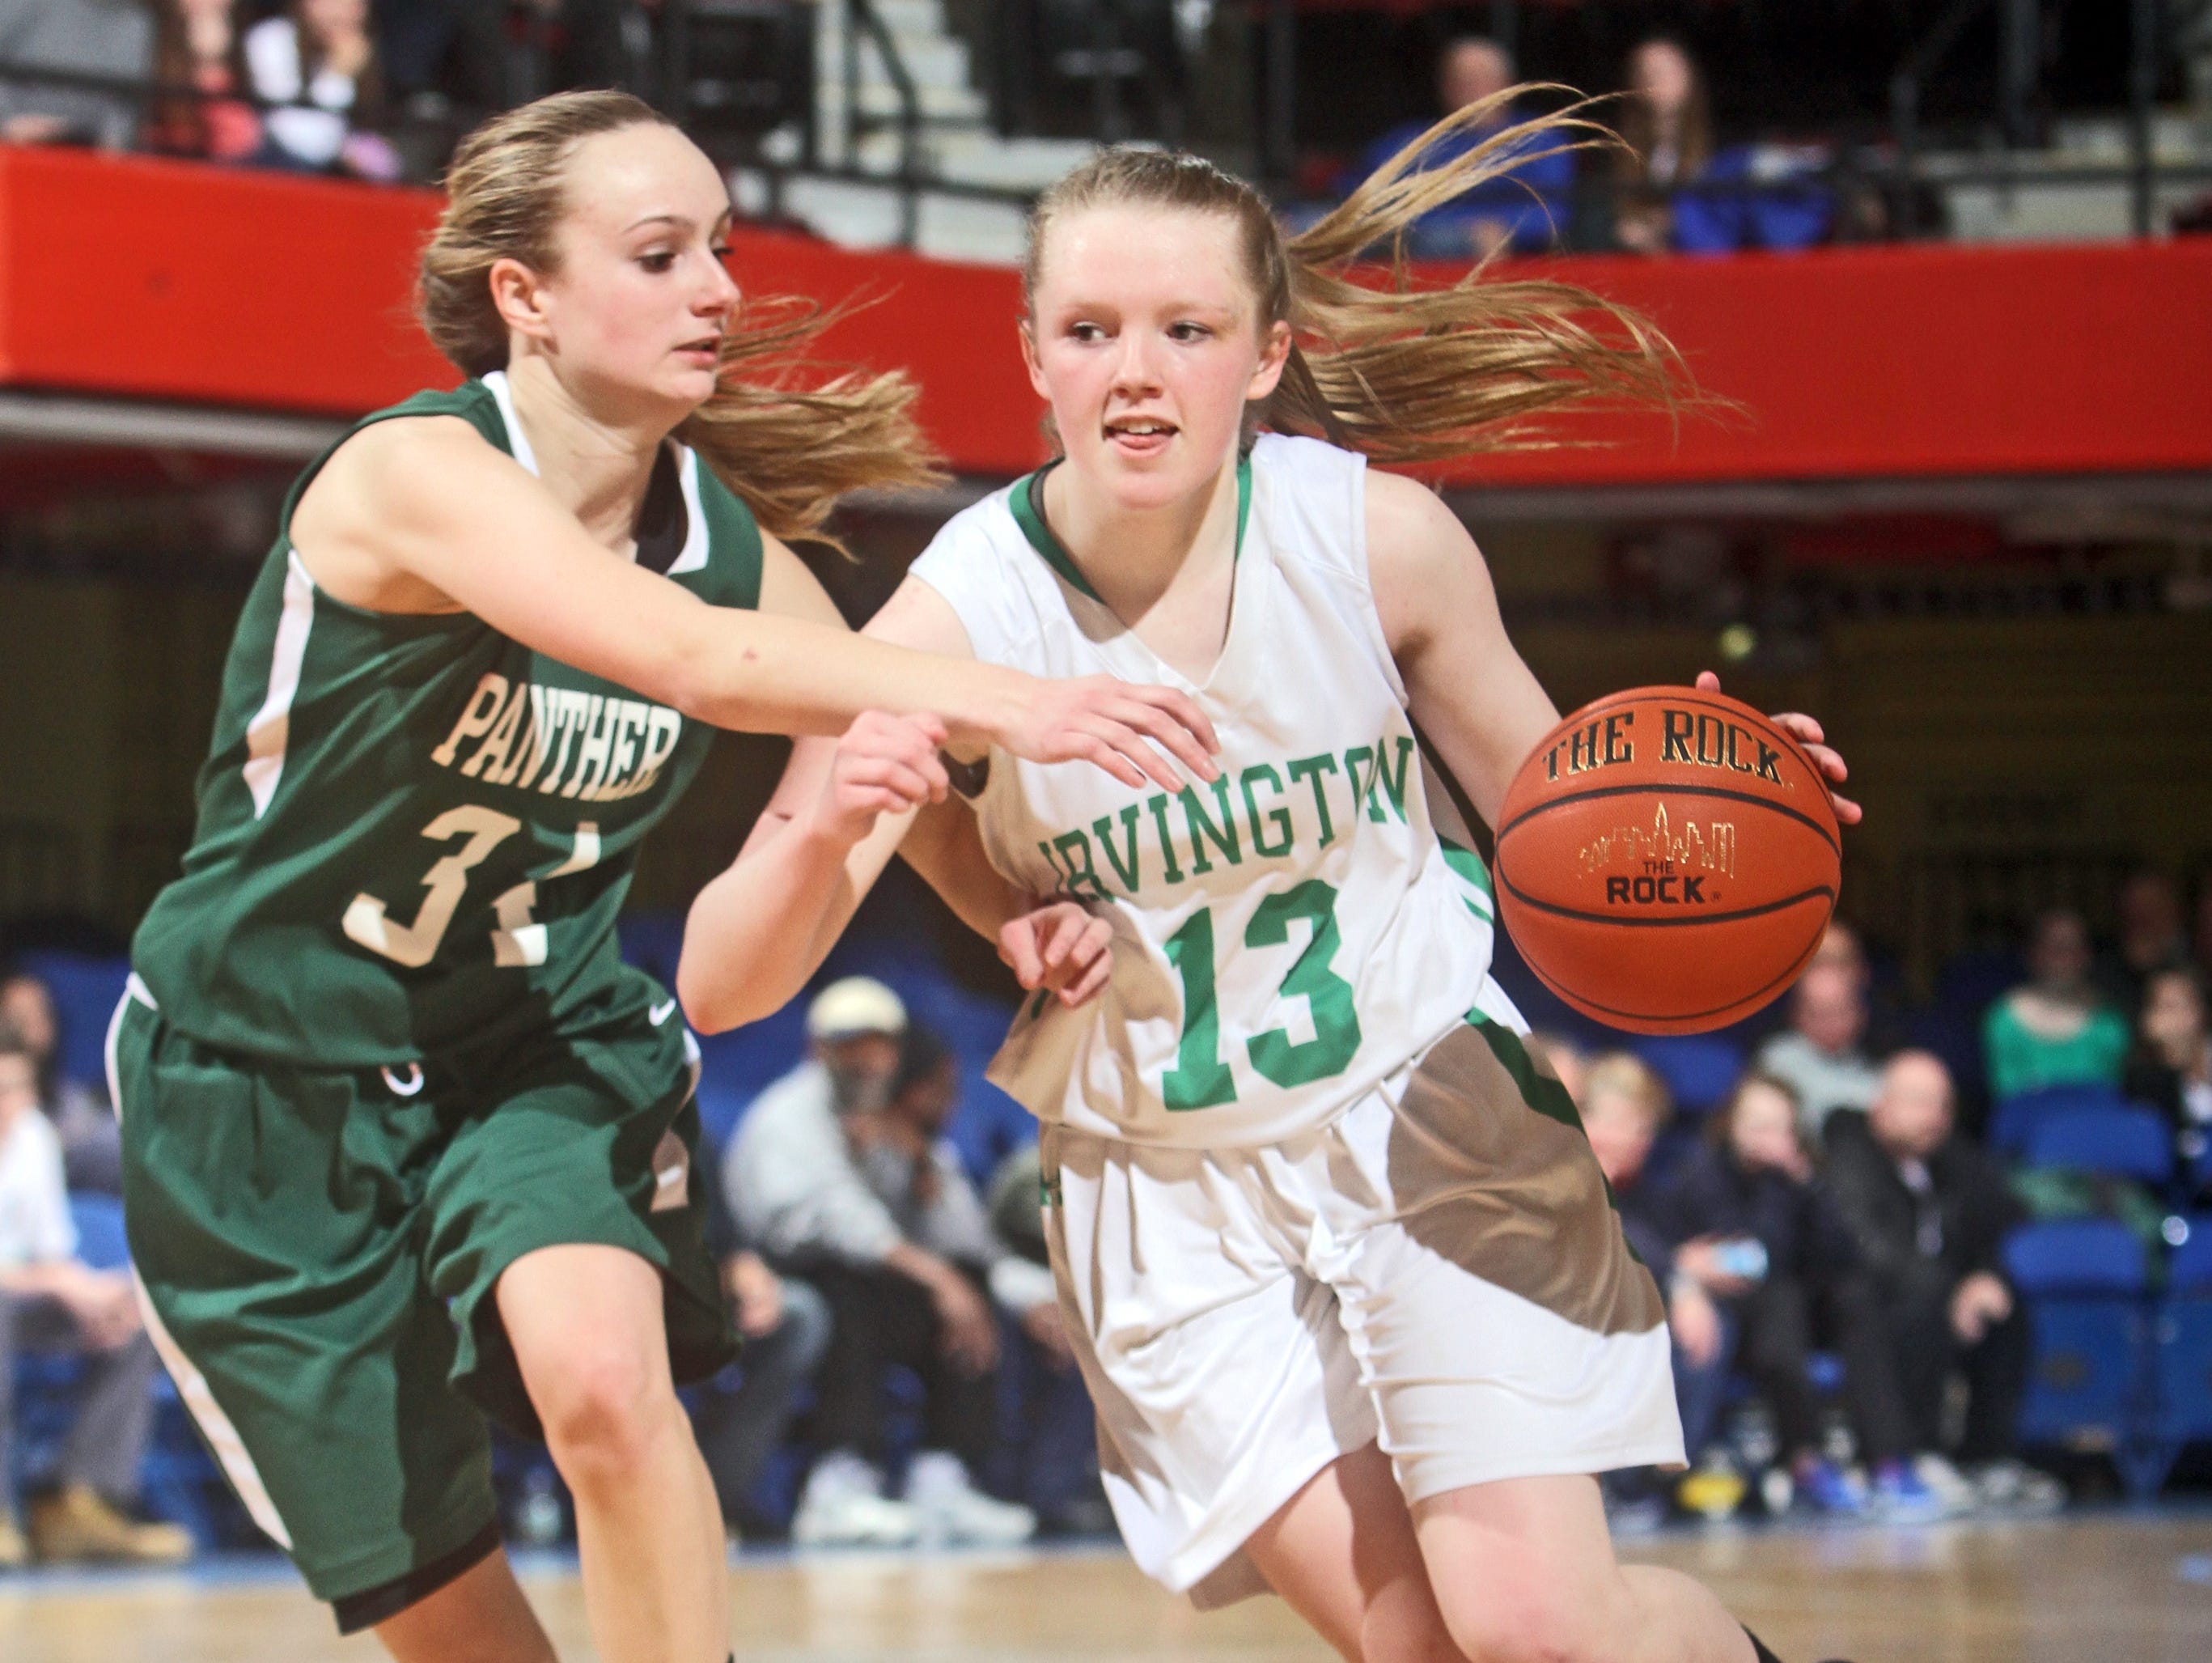 Lindsay Halpin drives on Pleasantville's Annmarie DiCarlo as Irvington defeated Pleasantville 61-39 in a Class B girls basketball semifinal against Pleasantville at the Westchester County Center Feb. 24, 2015. Halpin finished with seventeen points.